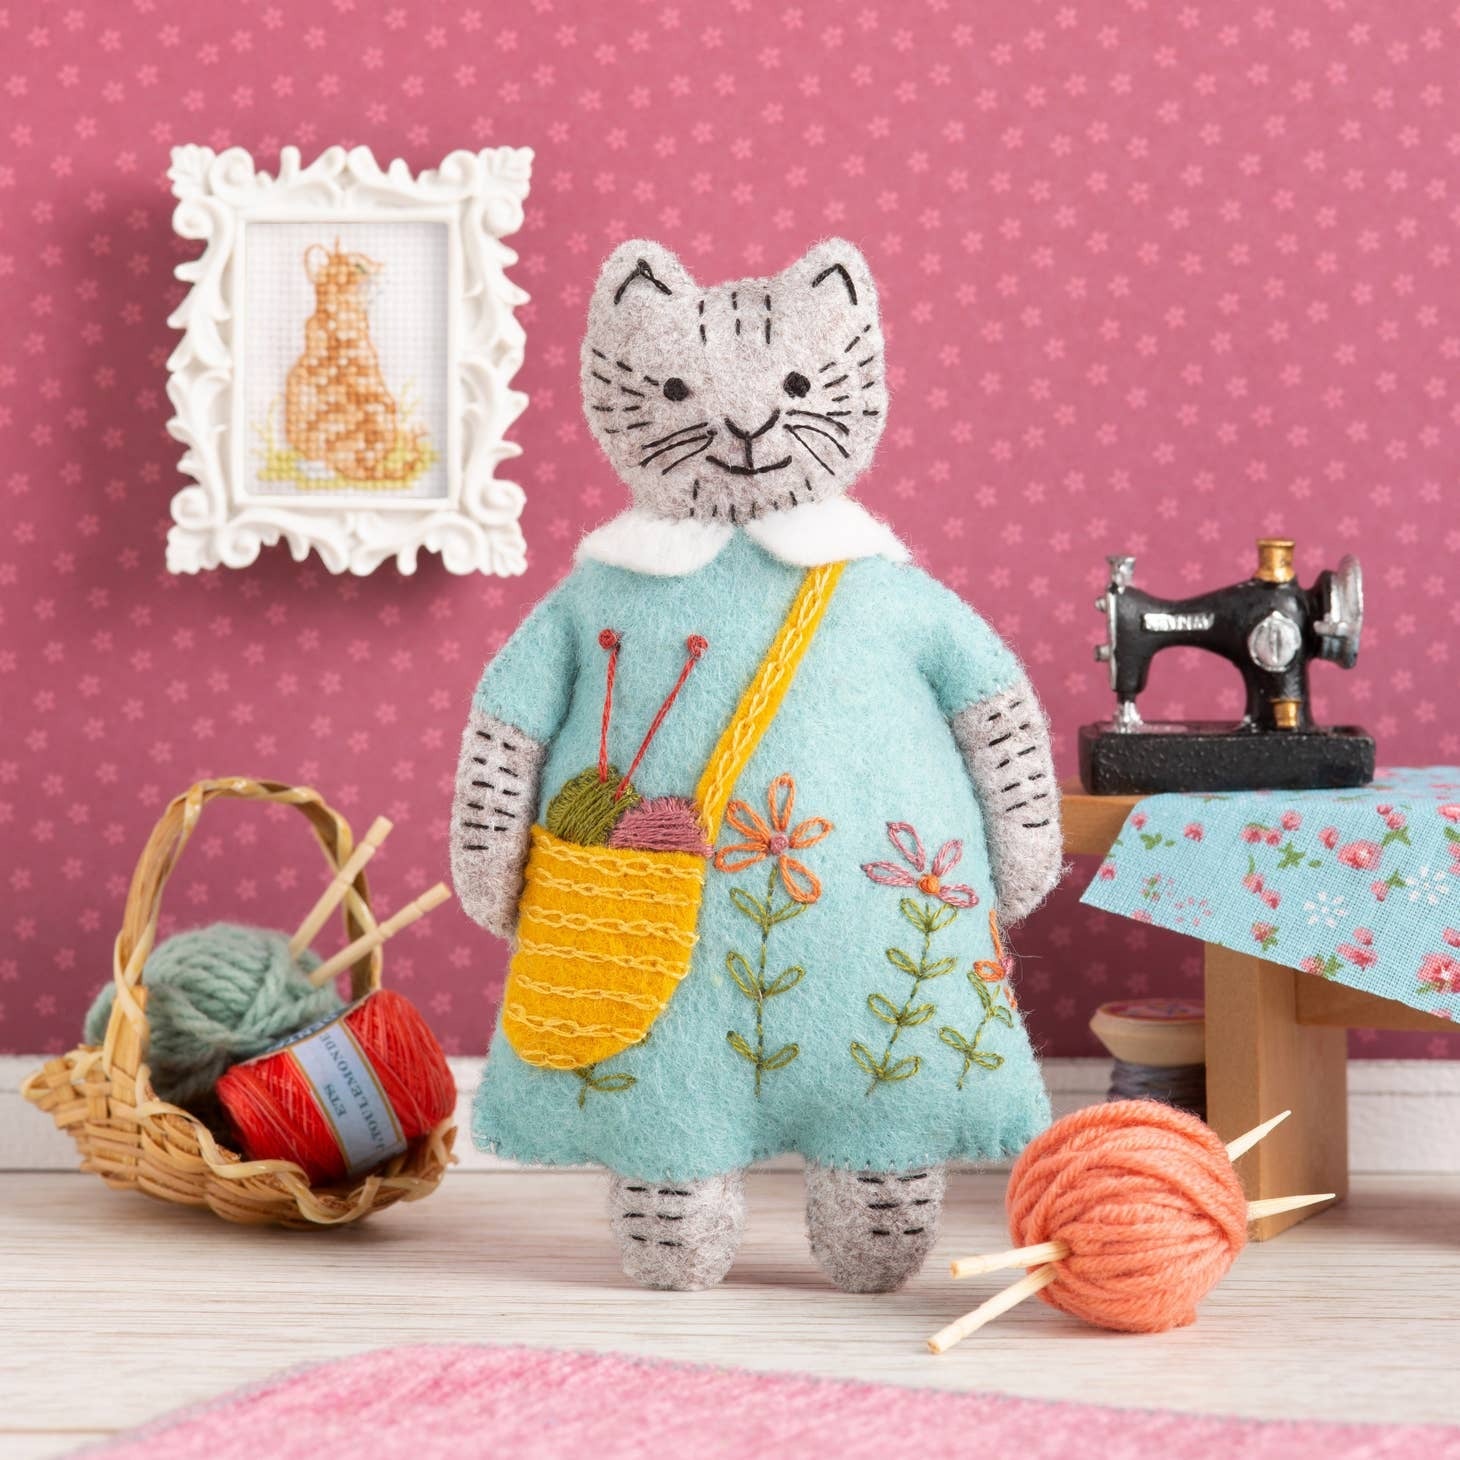 Handcrafted felt cat figure from a DIY felt cat craft kit in aqua dress, knitting with vibrant yarn, set against a pink backdrop with miniature sewing accessories and framed cross-stitch artwork.